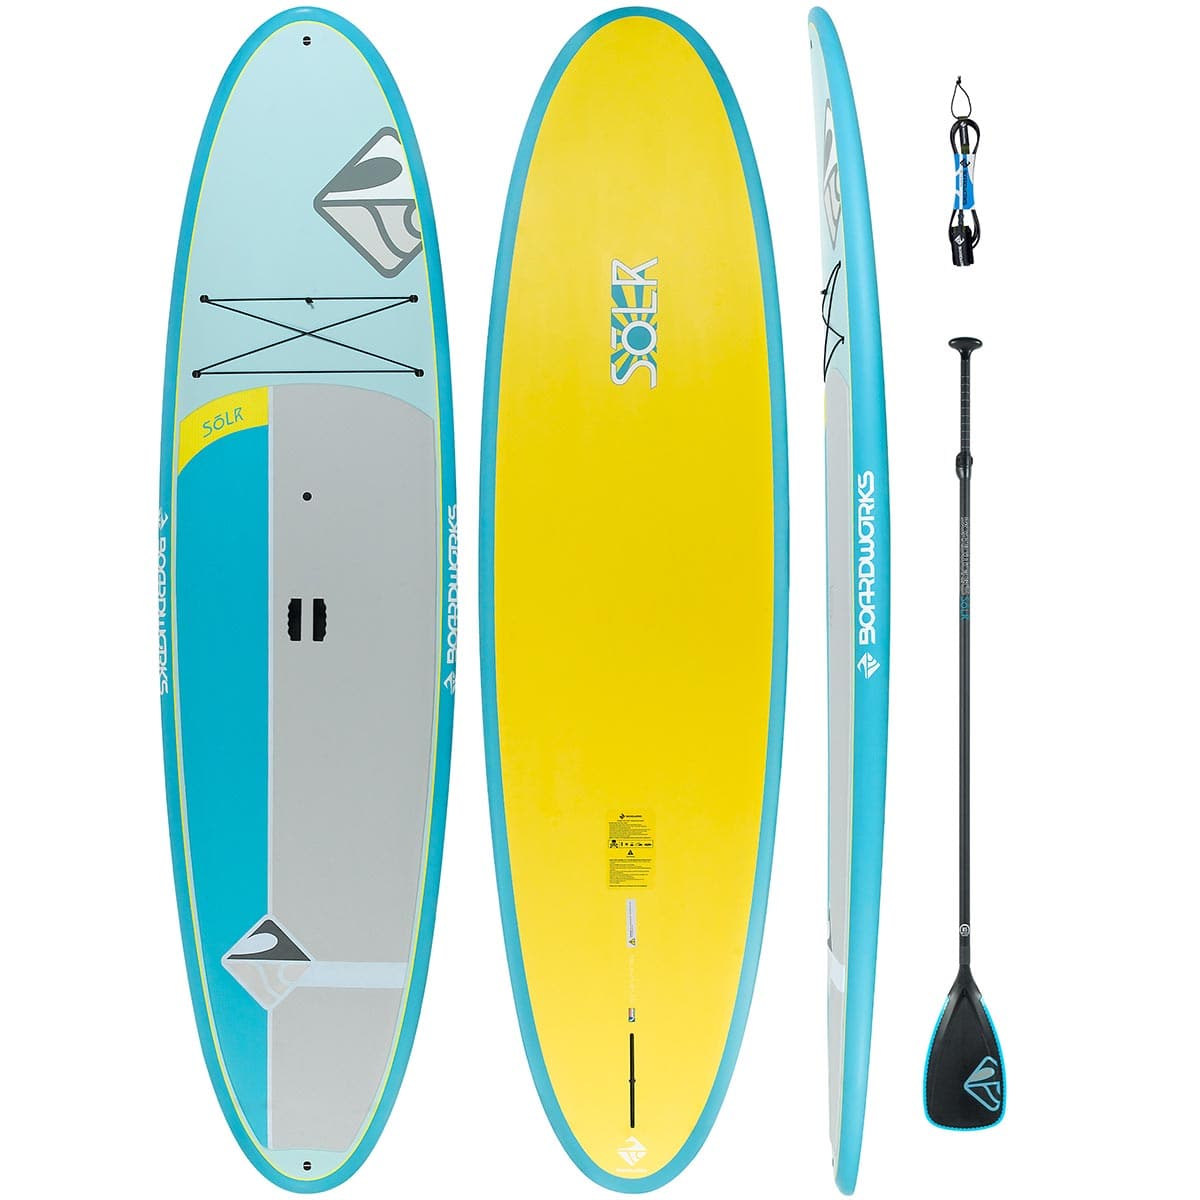 Featuring the Solr 10'6 SUP Package rigid sup manufactured by Boardworks shown here from a fifth angle.